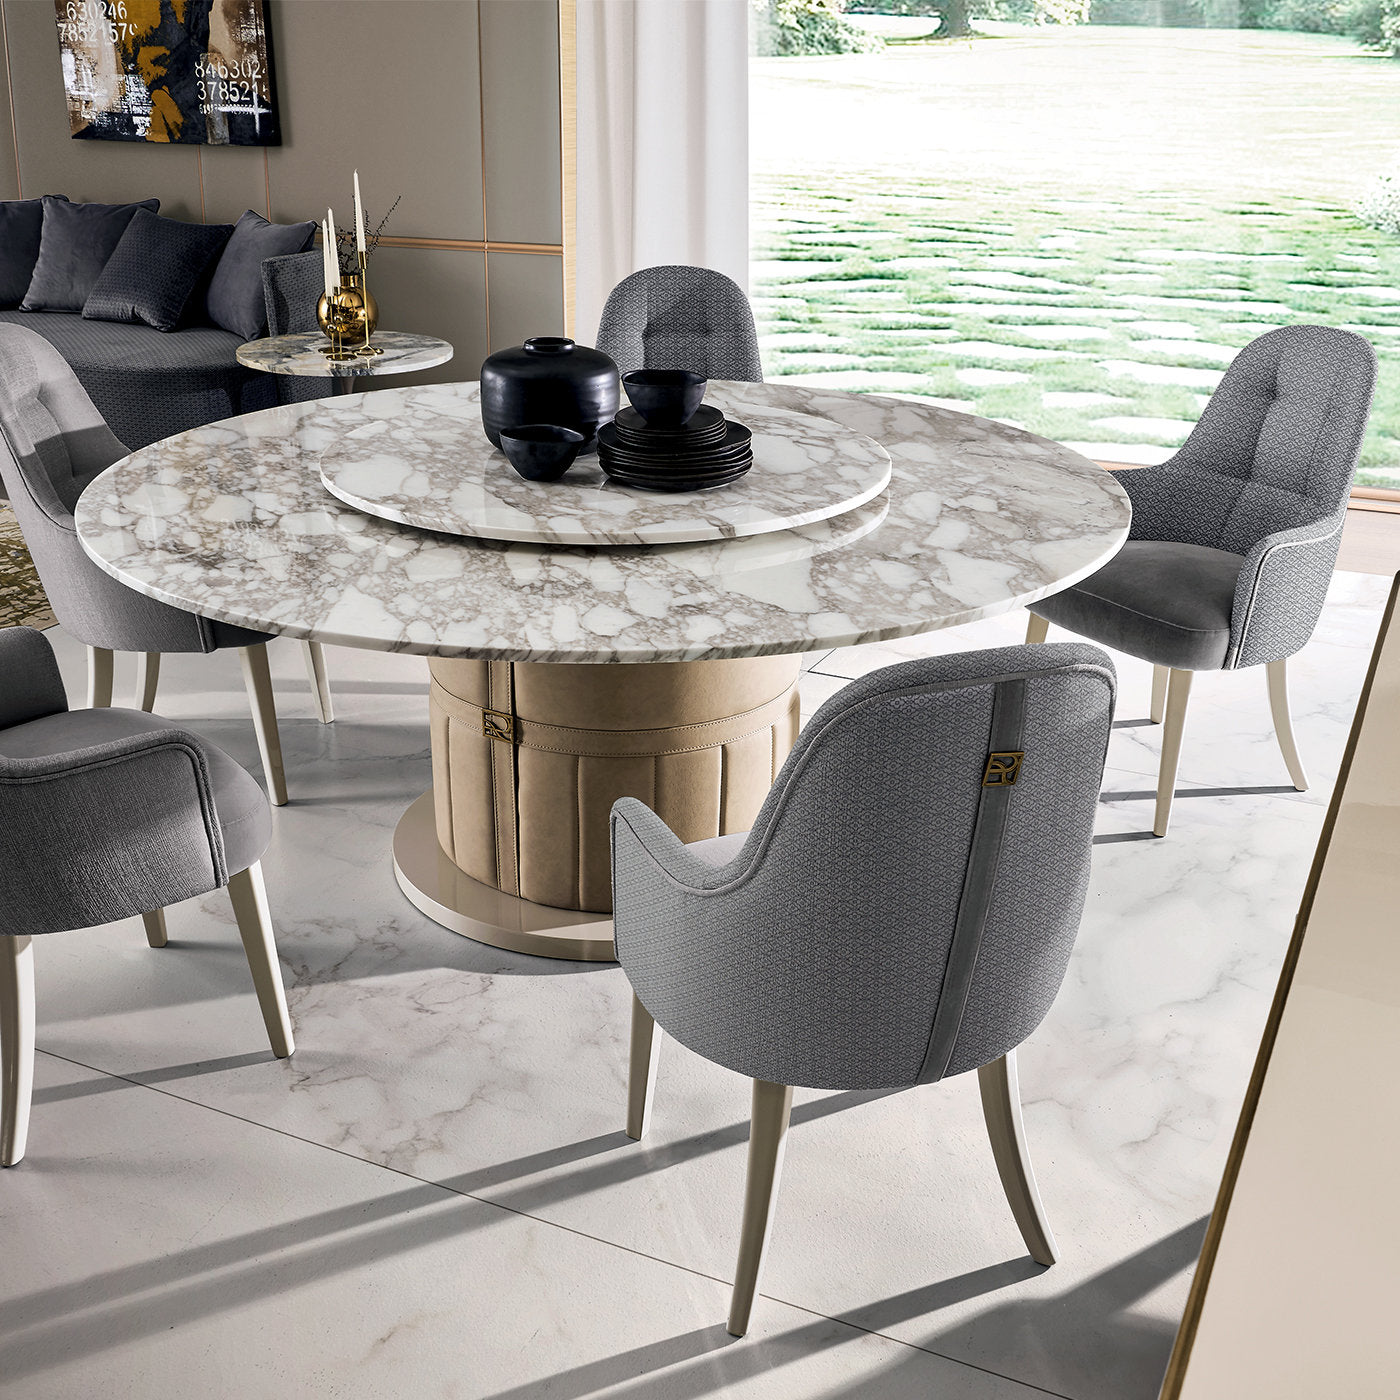 Richmond Round Table with Calacatta Marble Lazy Susan - Alternative view 1